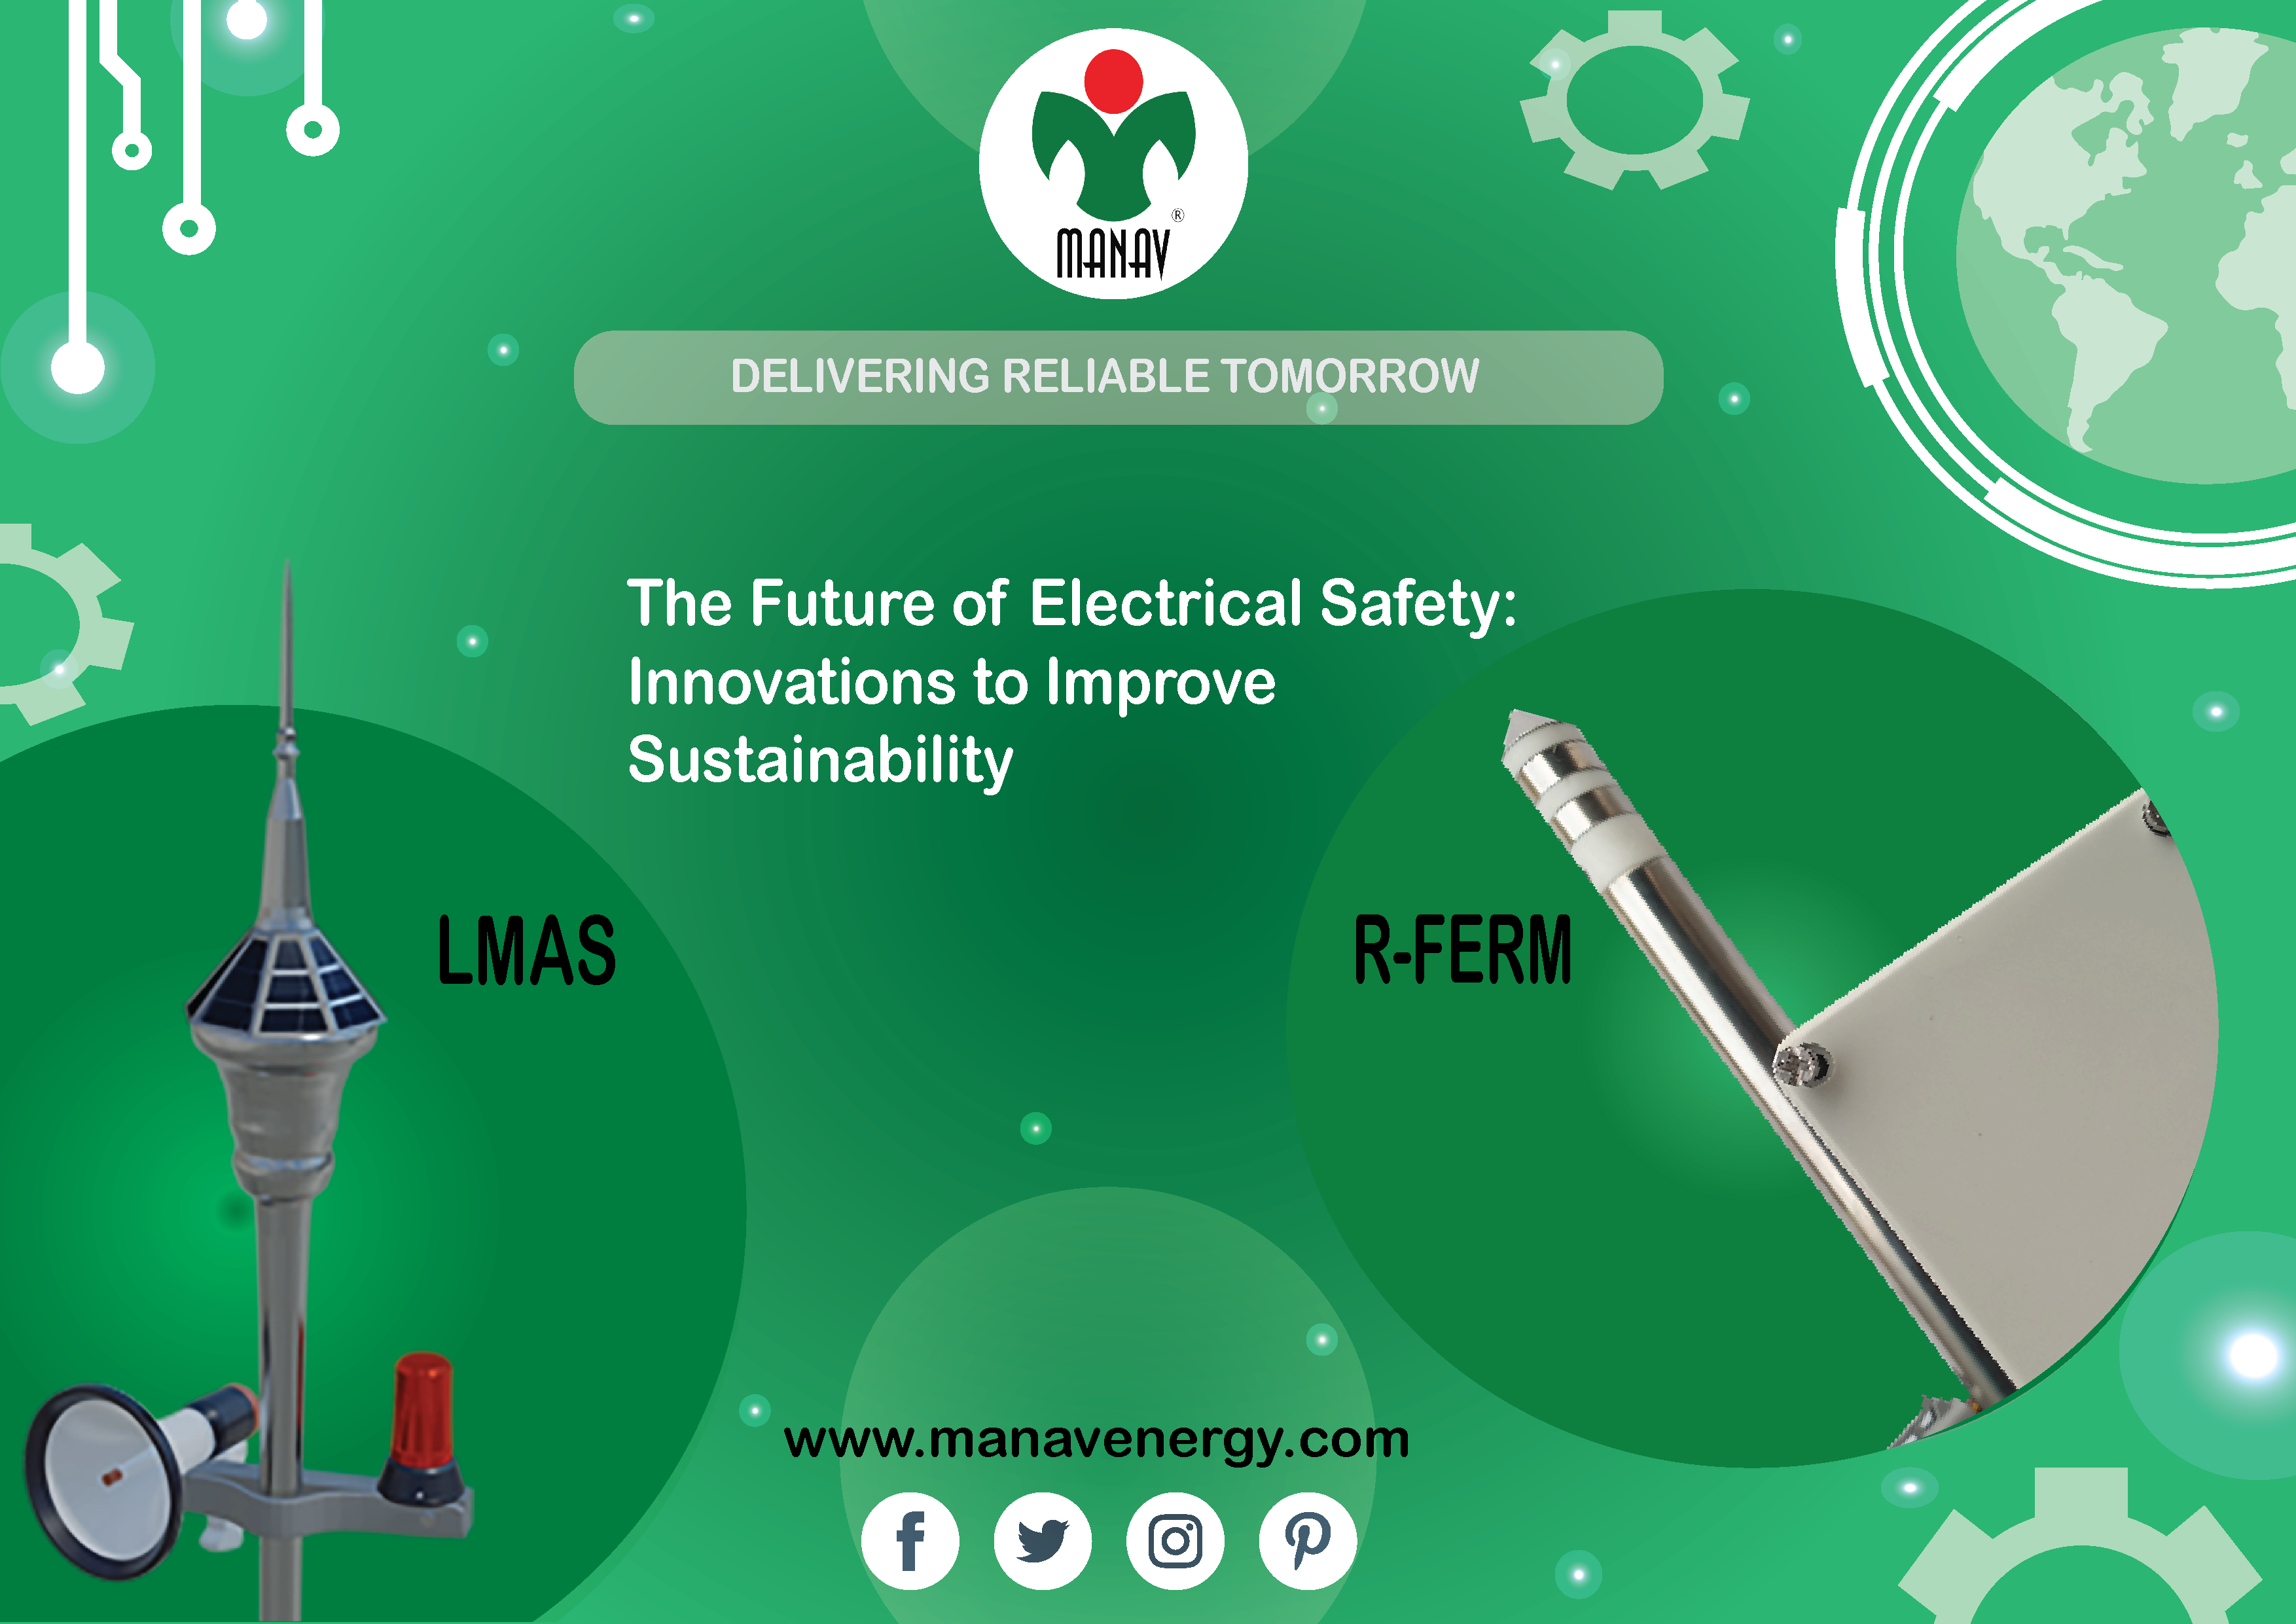 The Future of Electrical Safety: Innovations to Improve Safety